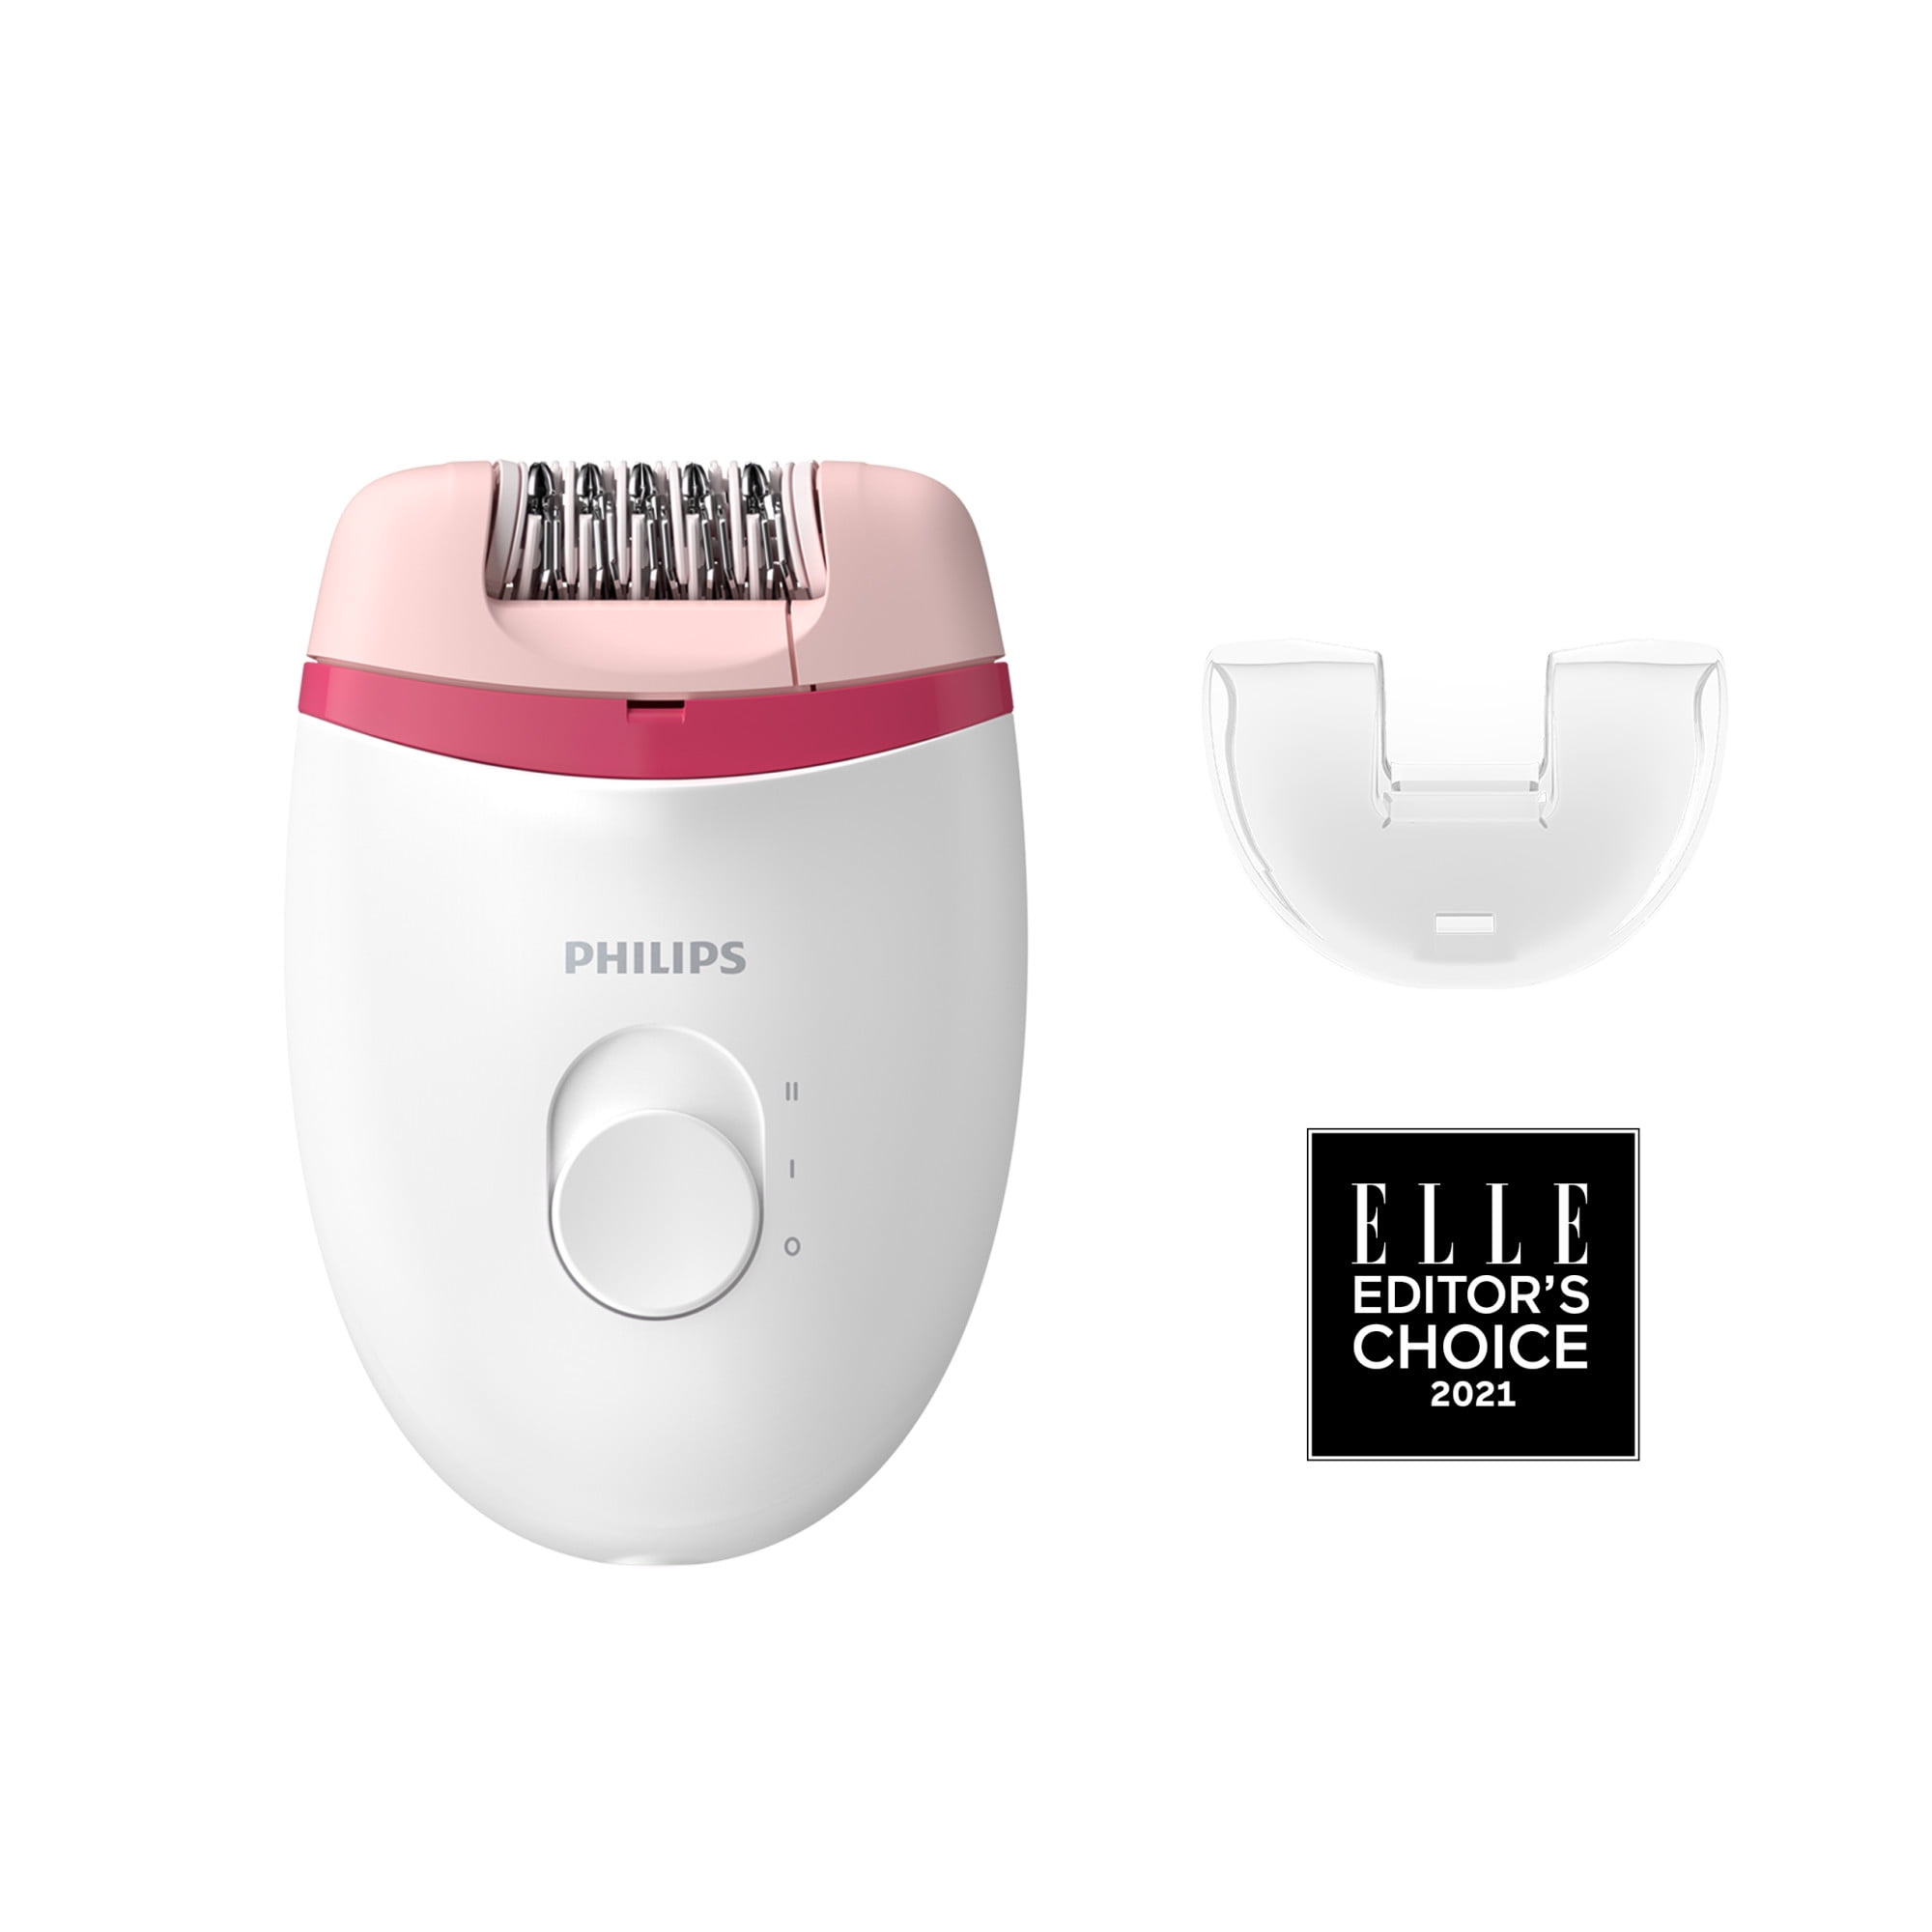 Philips Satinelle Essential Compact Hair Removal Epilator (Bre235) -  Walmart.com